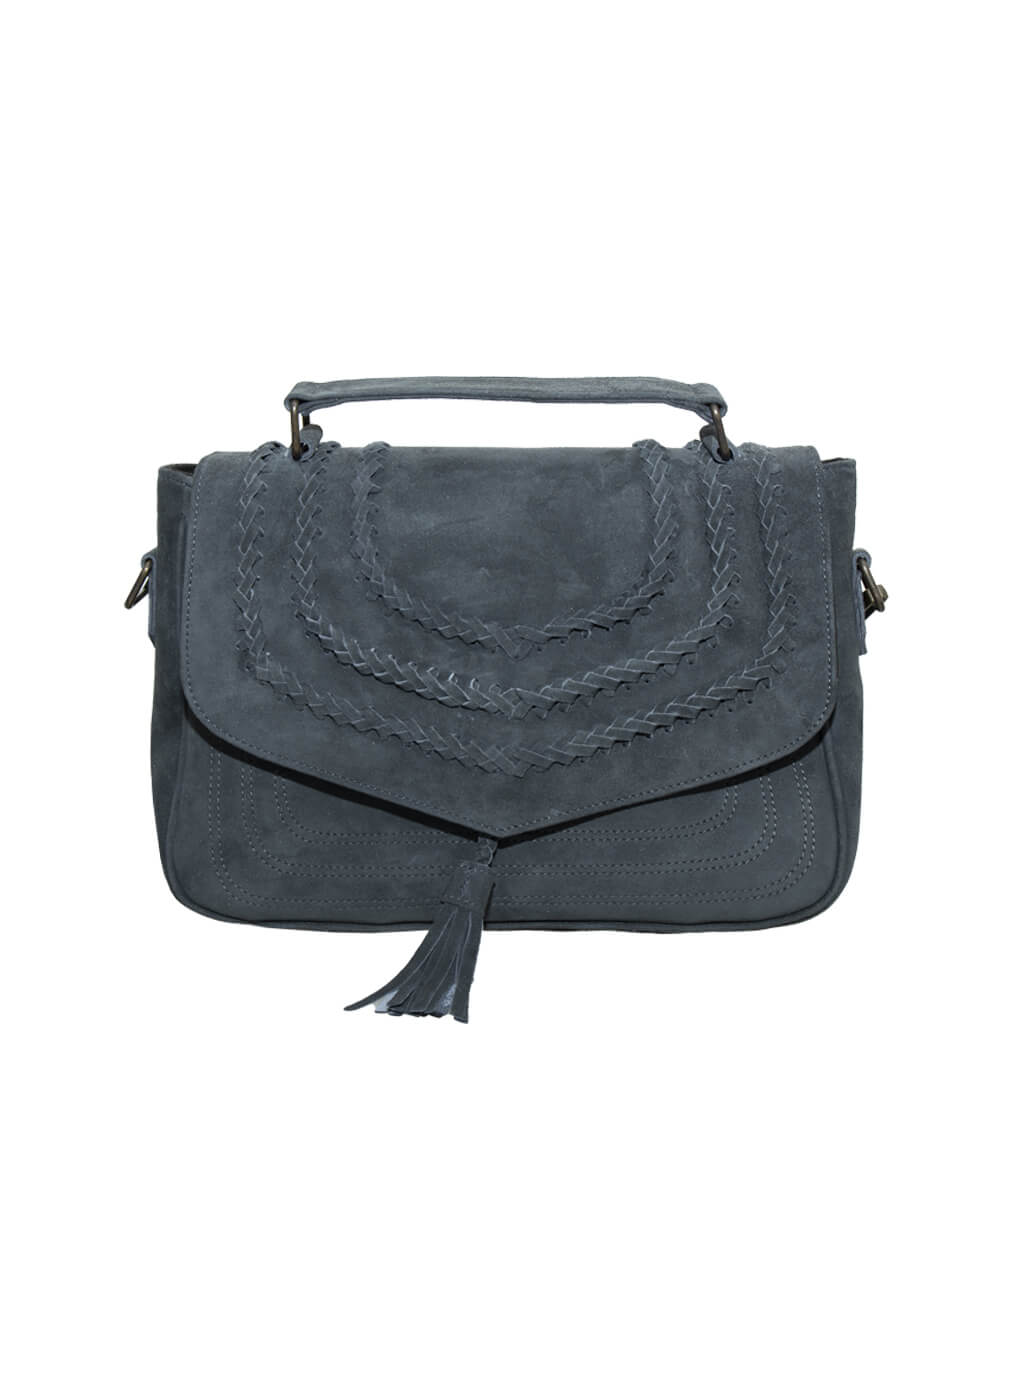 Goat Leather Bag “Just About you”, dusty indigo